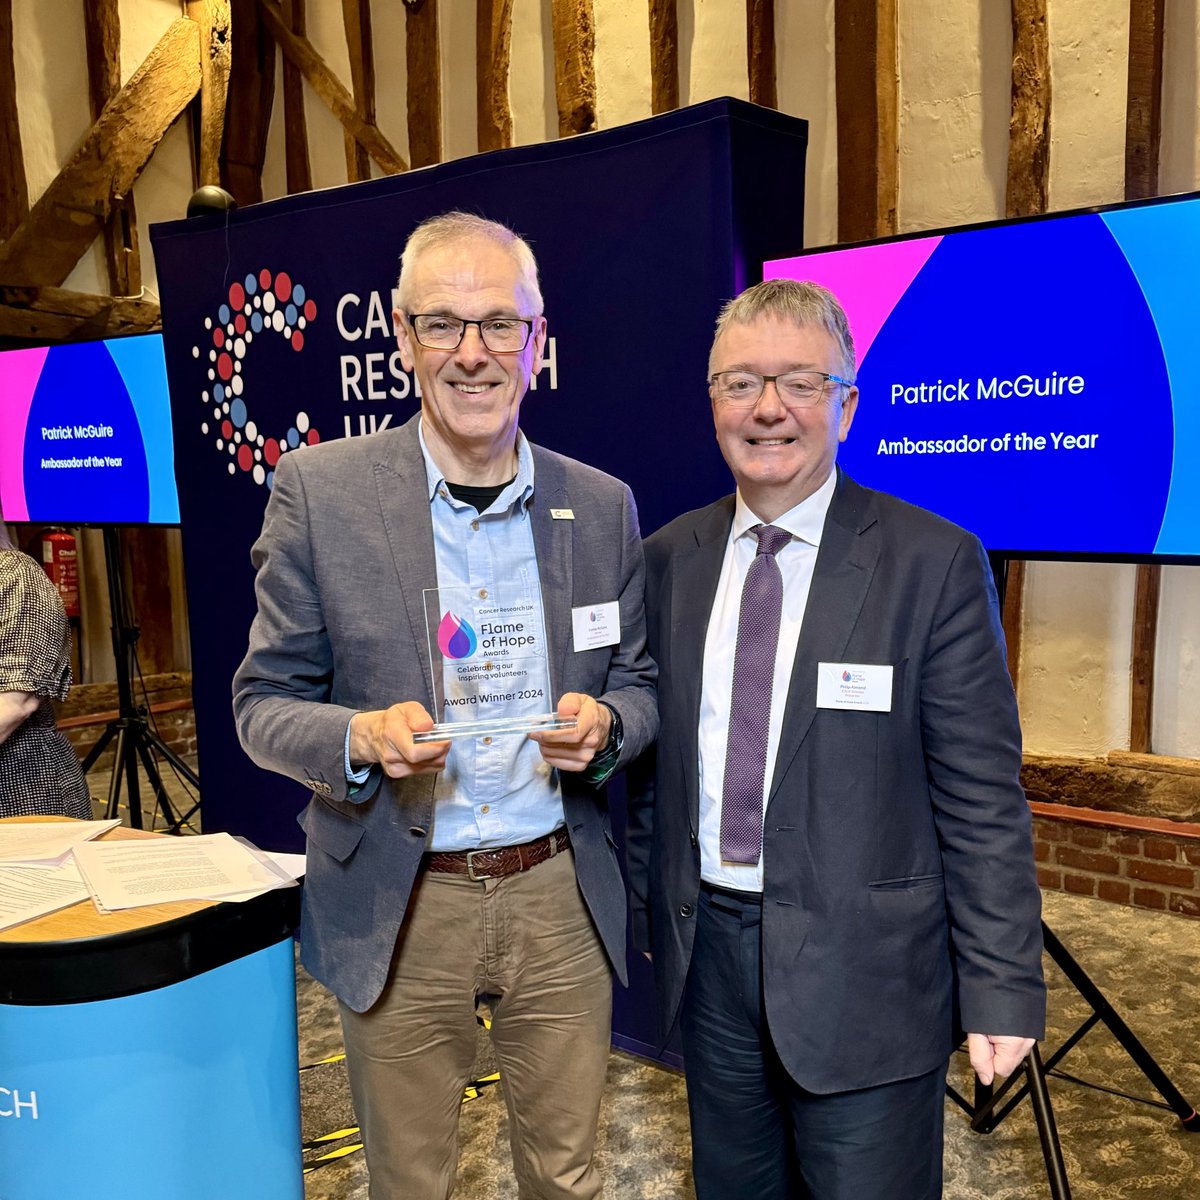 Very proud to receive award with ⁦@patrickjmcguire⁩ from ⁦@Phil_CRUK⁩ ⁦@CR_UK⁩ #FlameofHope awards. Inspired by other #CRUKVolunteers #TogetherWeAreBeatingCancer